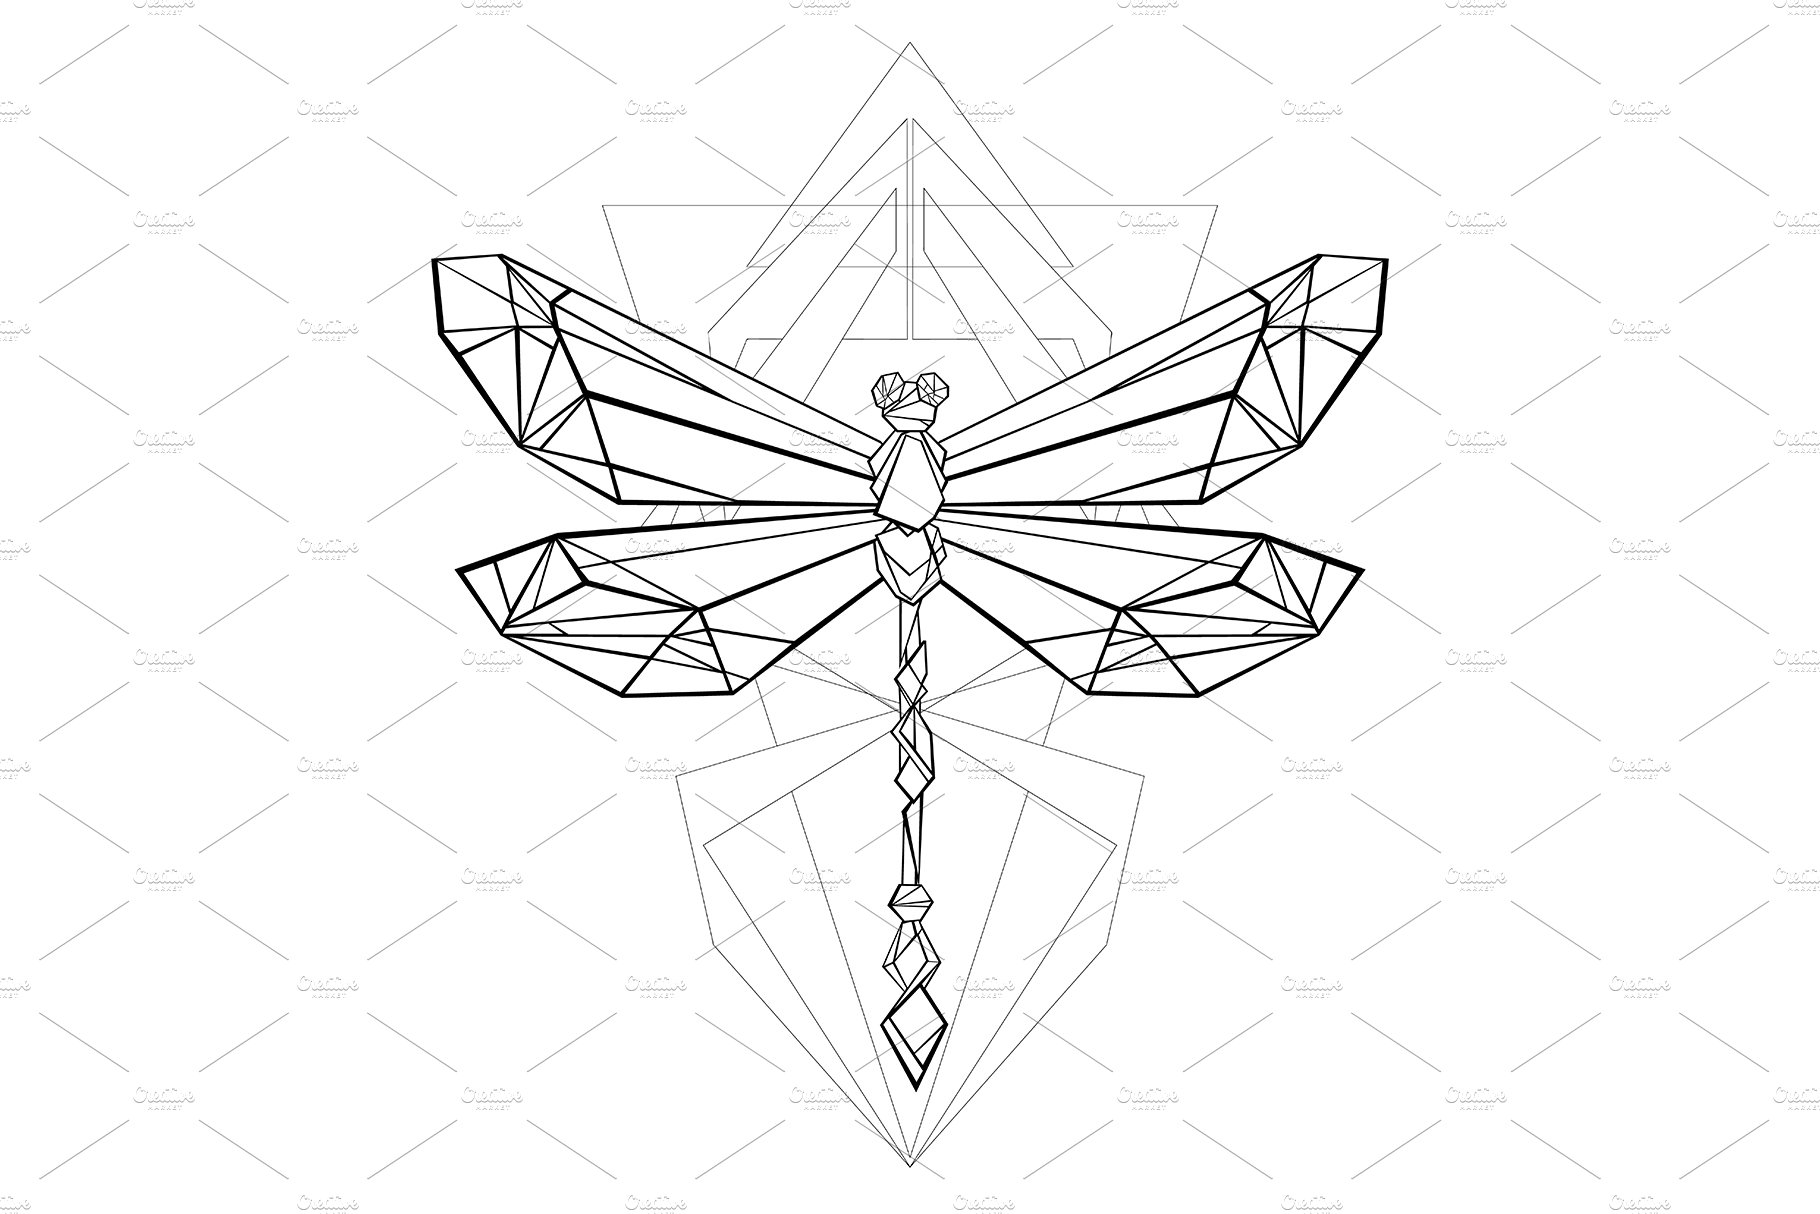 Polygonal Dragonfly cover image.